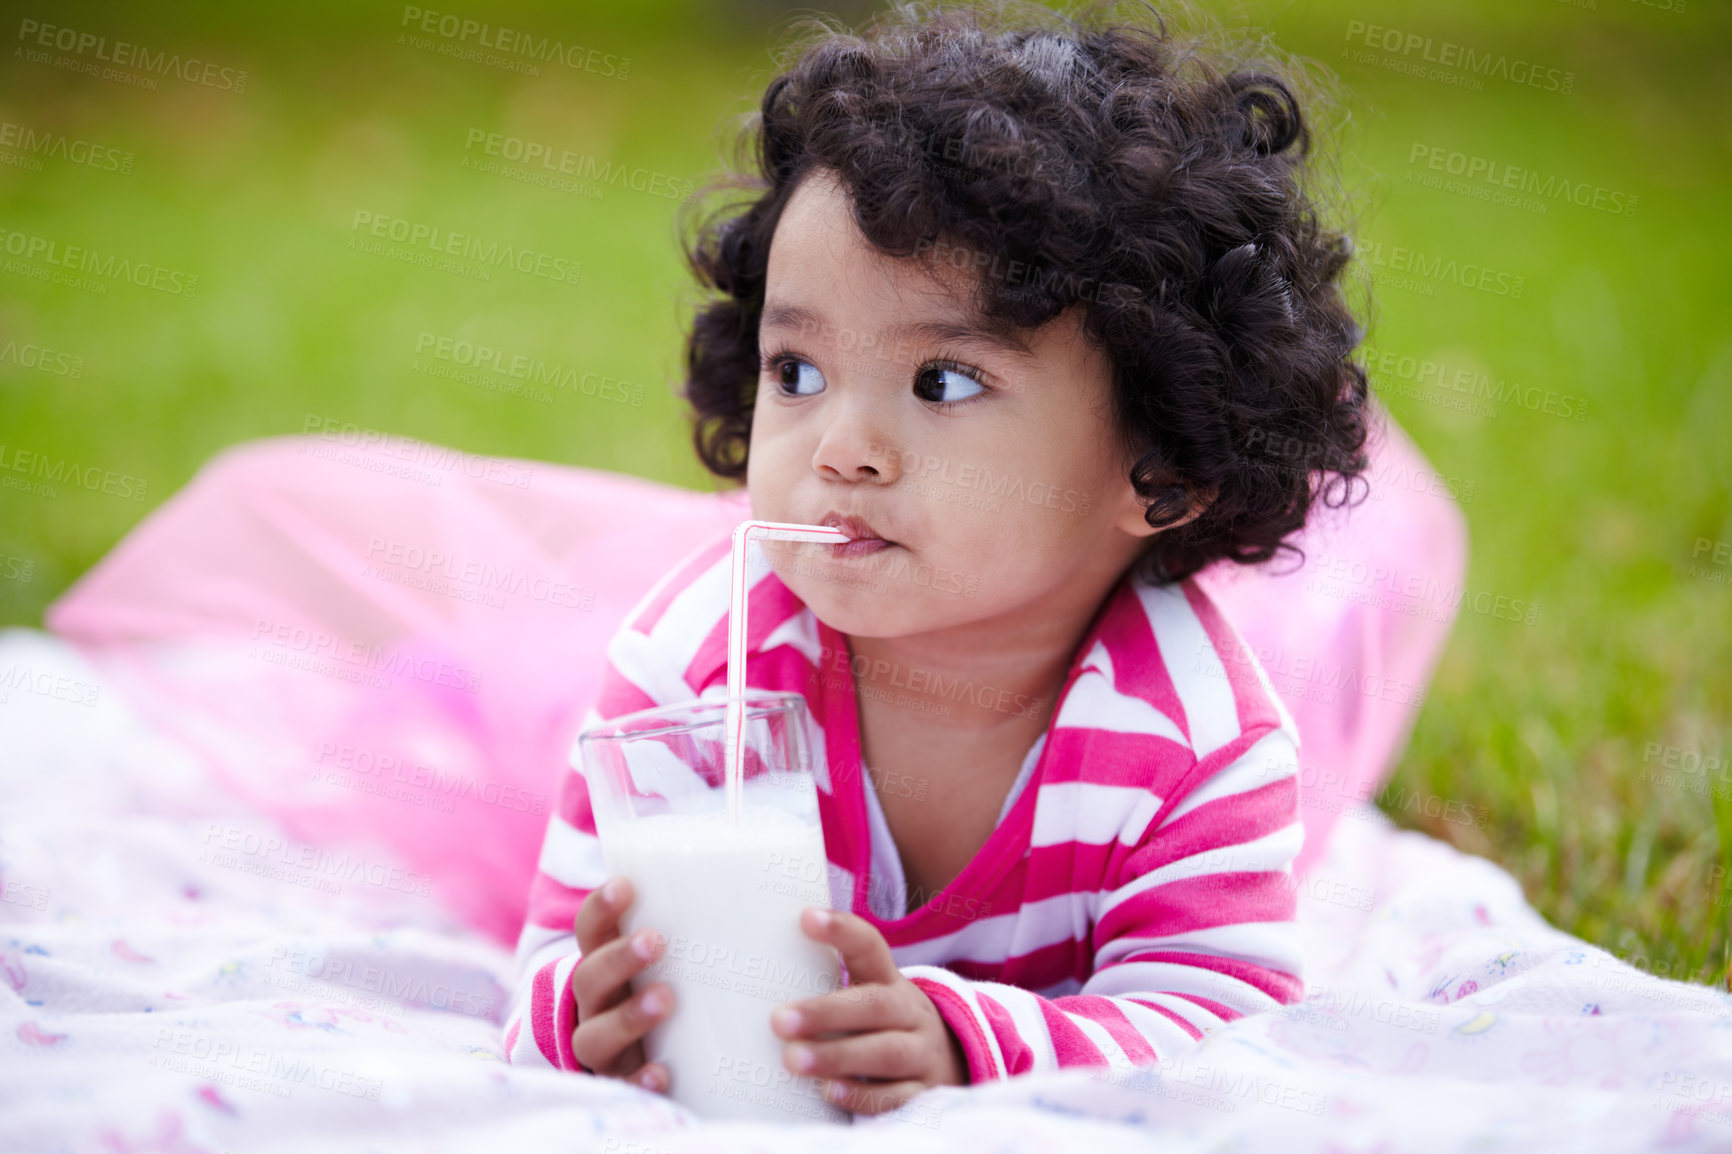 Buy stock photo Adorable little girl drinking milk through a straw while lying on the grass